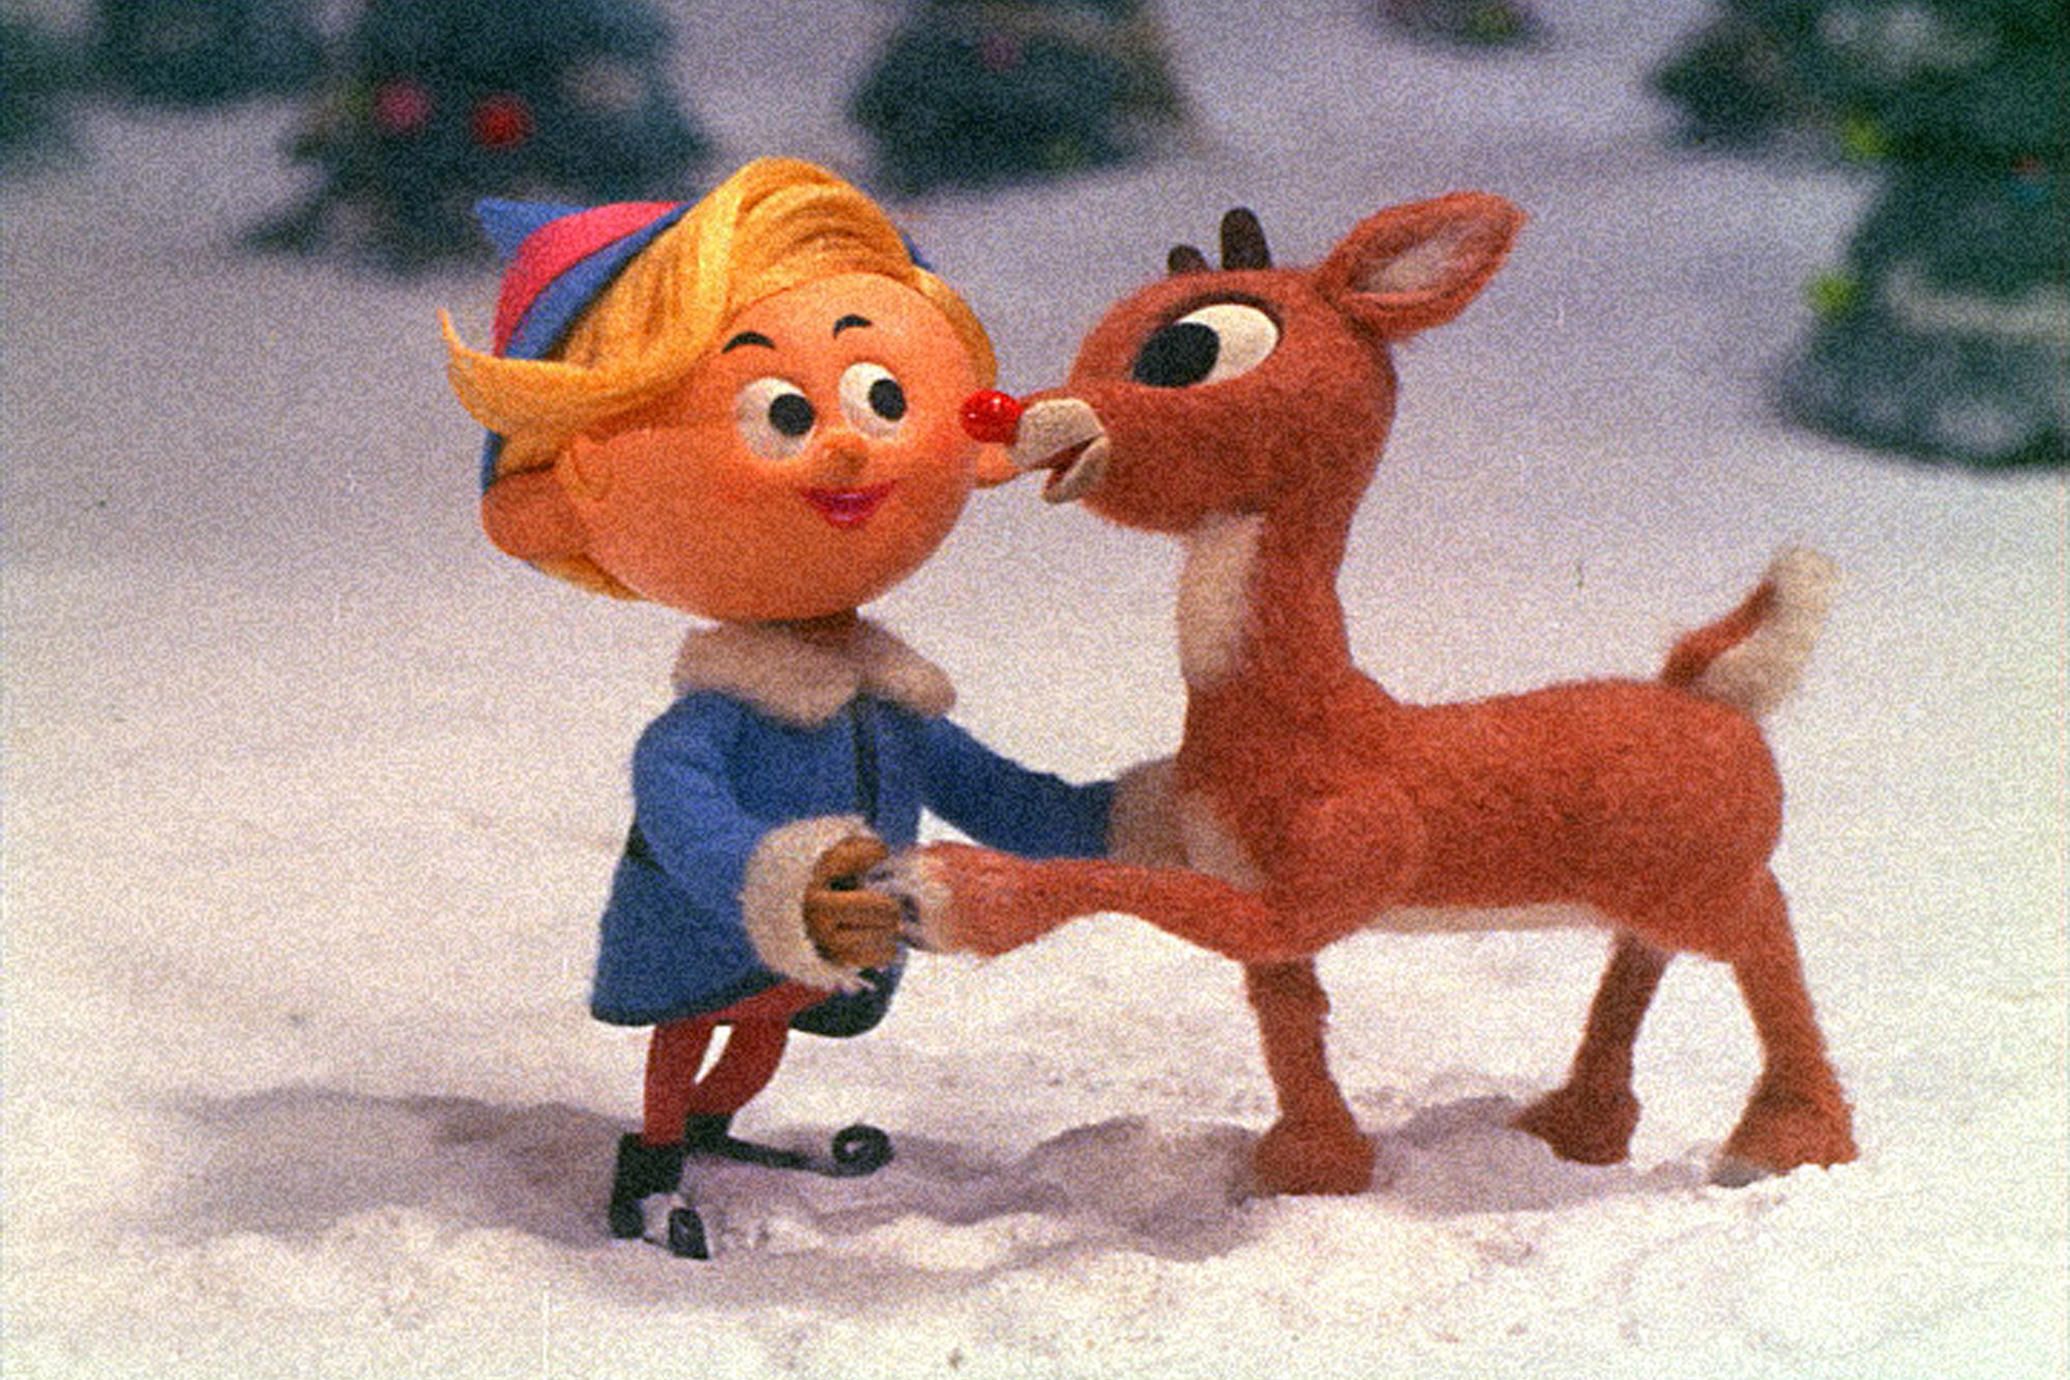 People Are Upset About "Disturbing" Themes In 'Rudolph The RedNosed